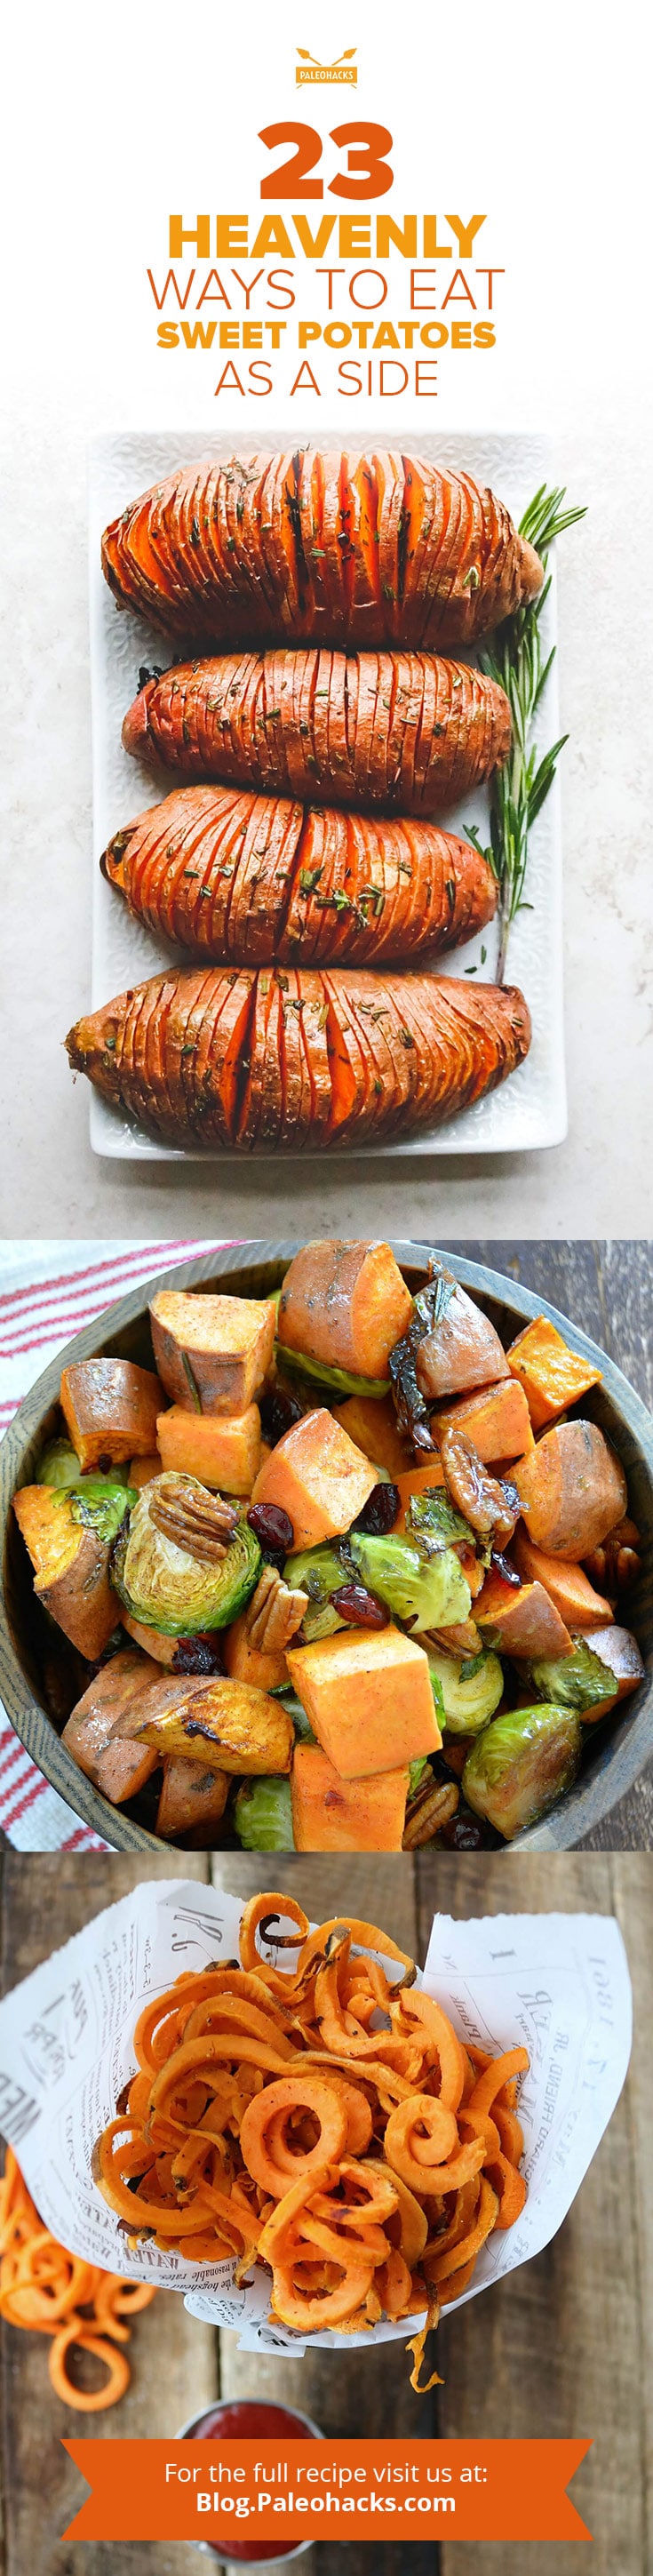 Upgrade your side dish game with easy sweet potato ideas you can pair with your favorite entrées. Because every entree deserves a companion!